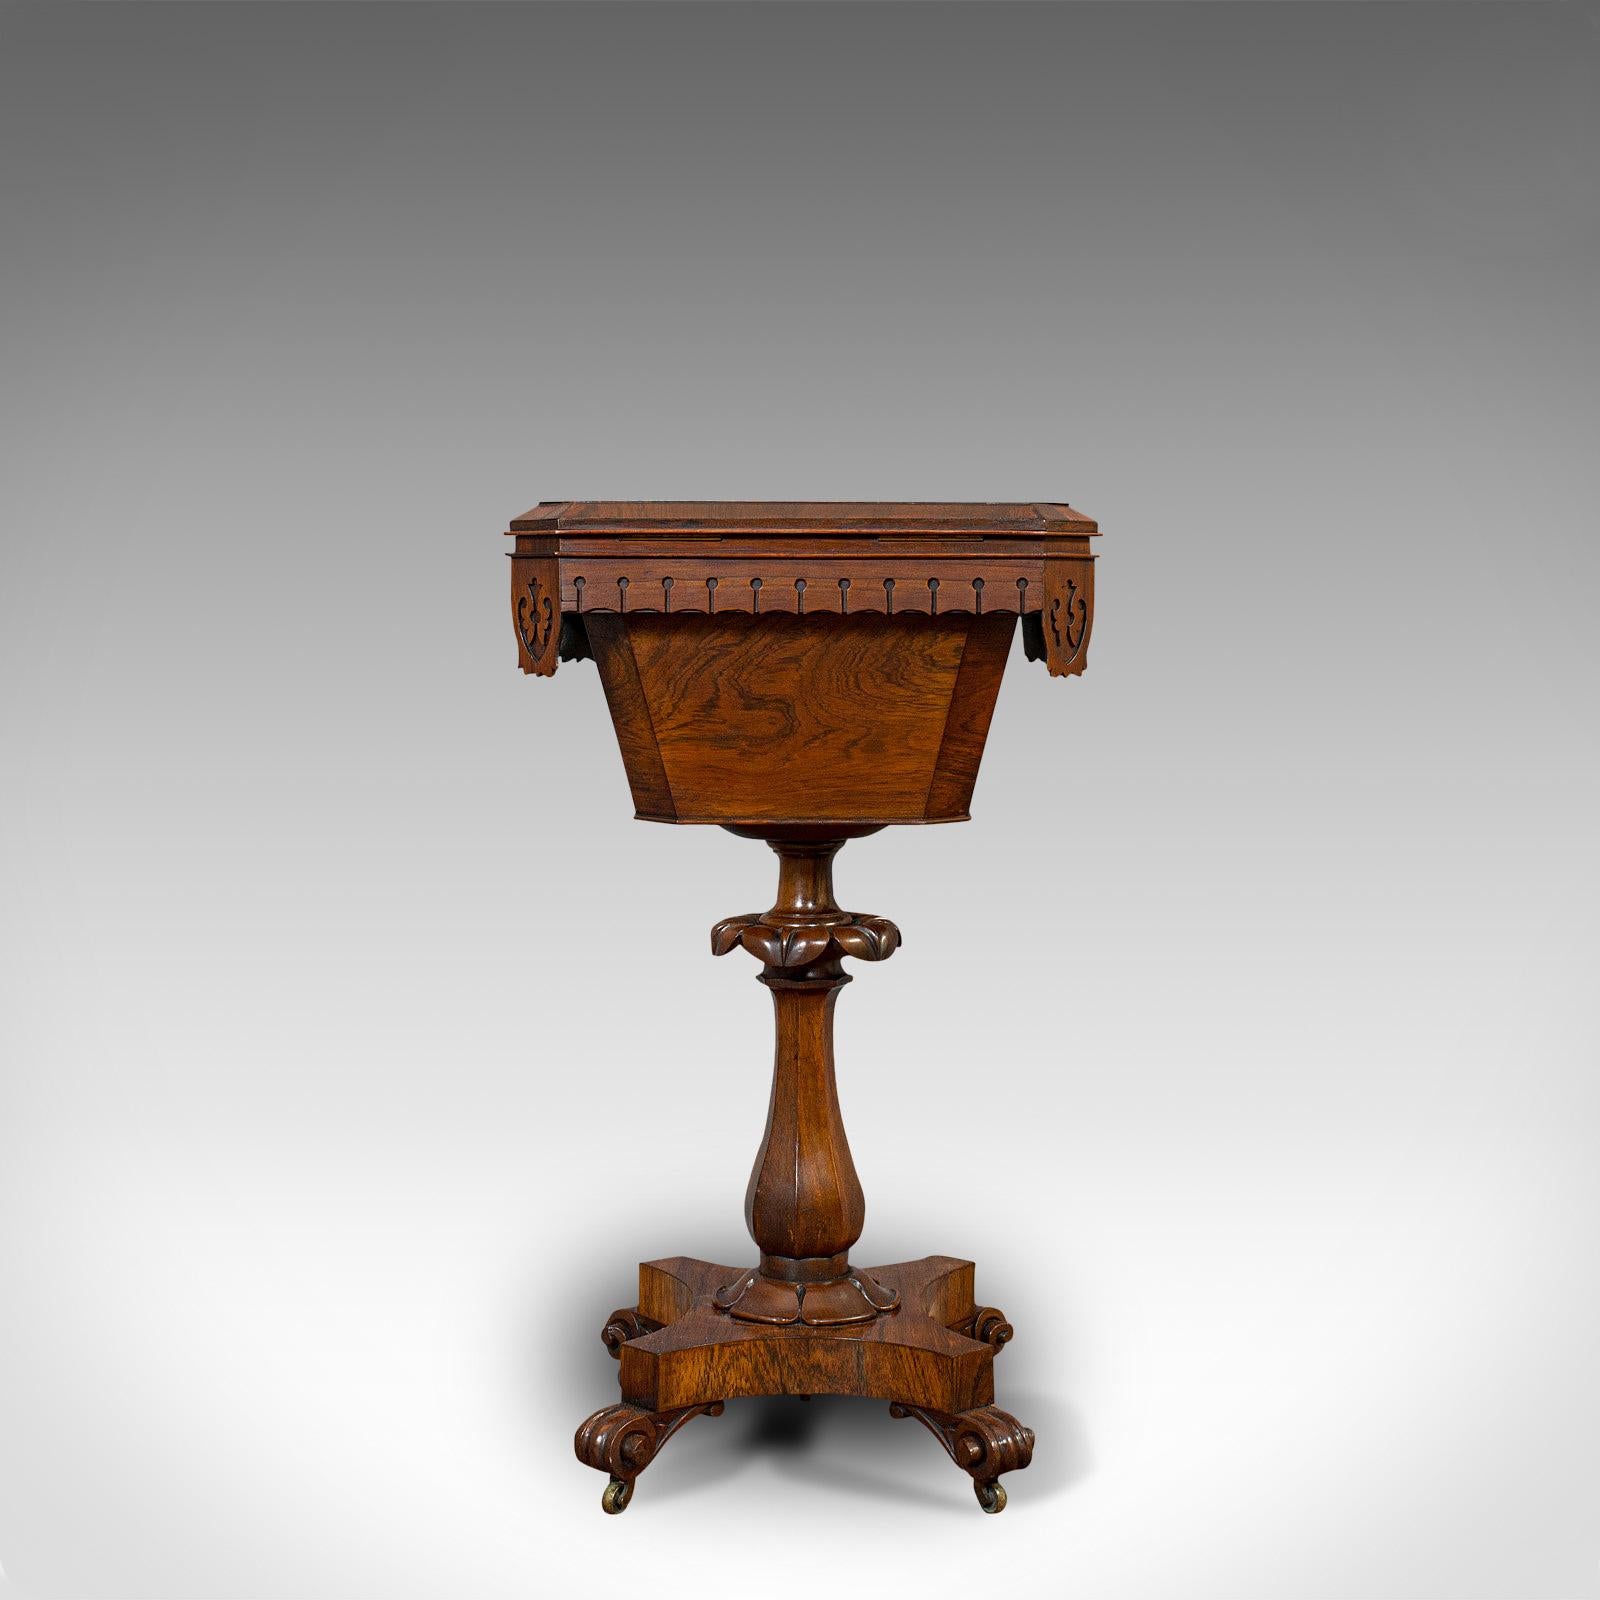 Antique Lady's Work Box, English, Rosewood, Sewing, Table, Regency, circa 1820 2